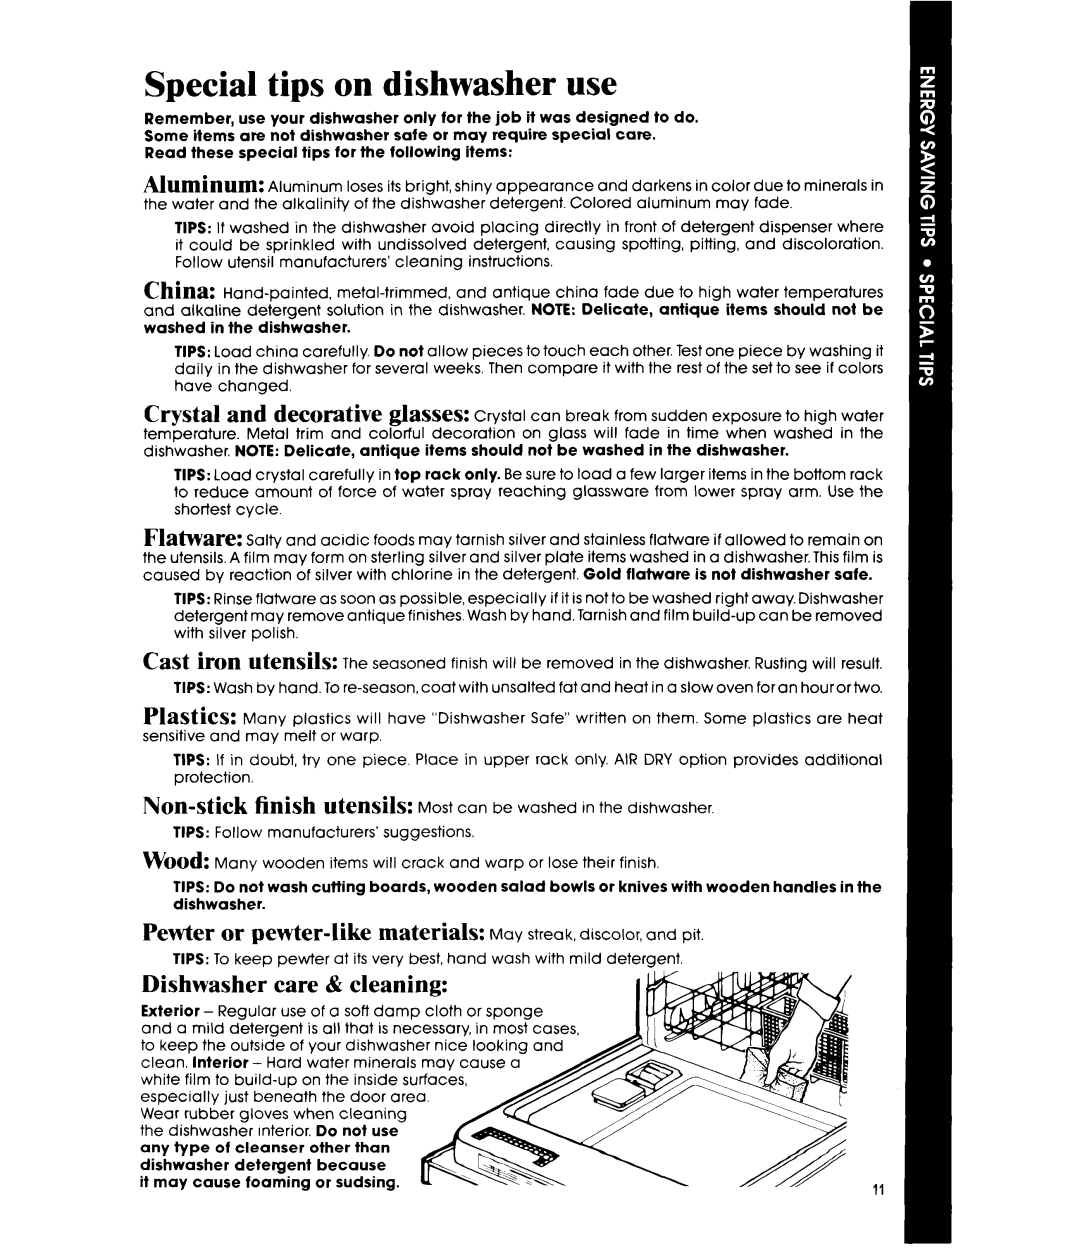 Whirlpool DU1099XT manual Special tips on dishwasher use, Non-stickfinish UteUSilS, Dishwasher care & cleaning 